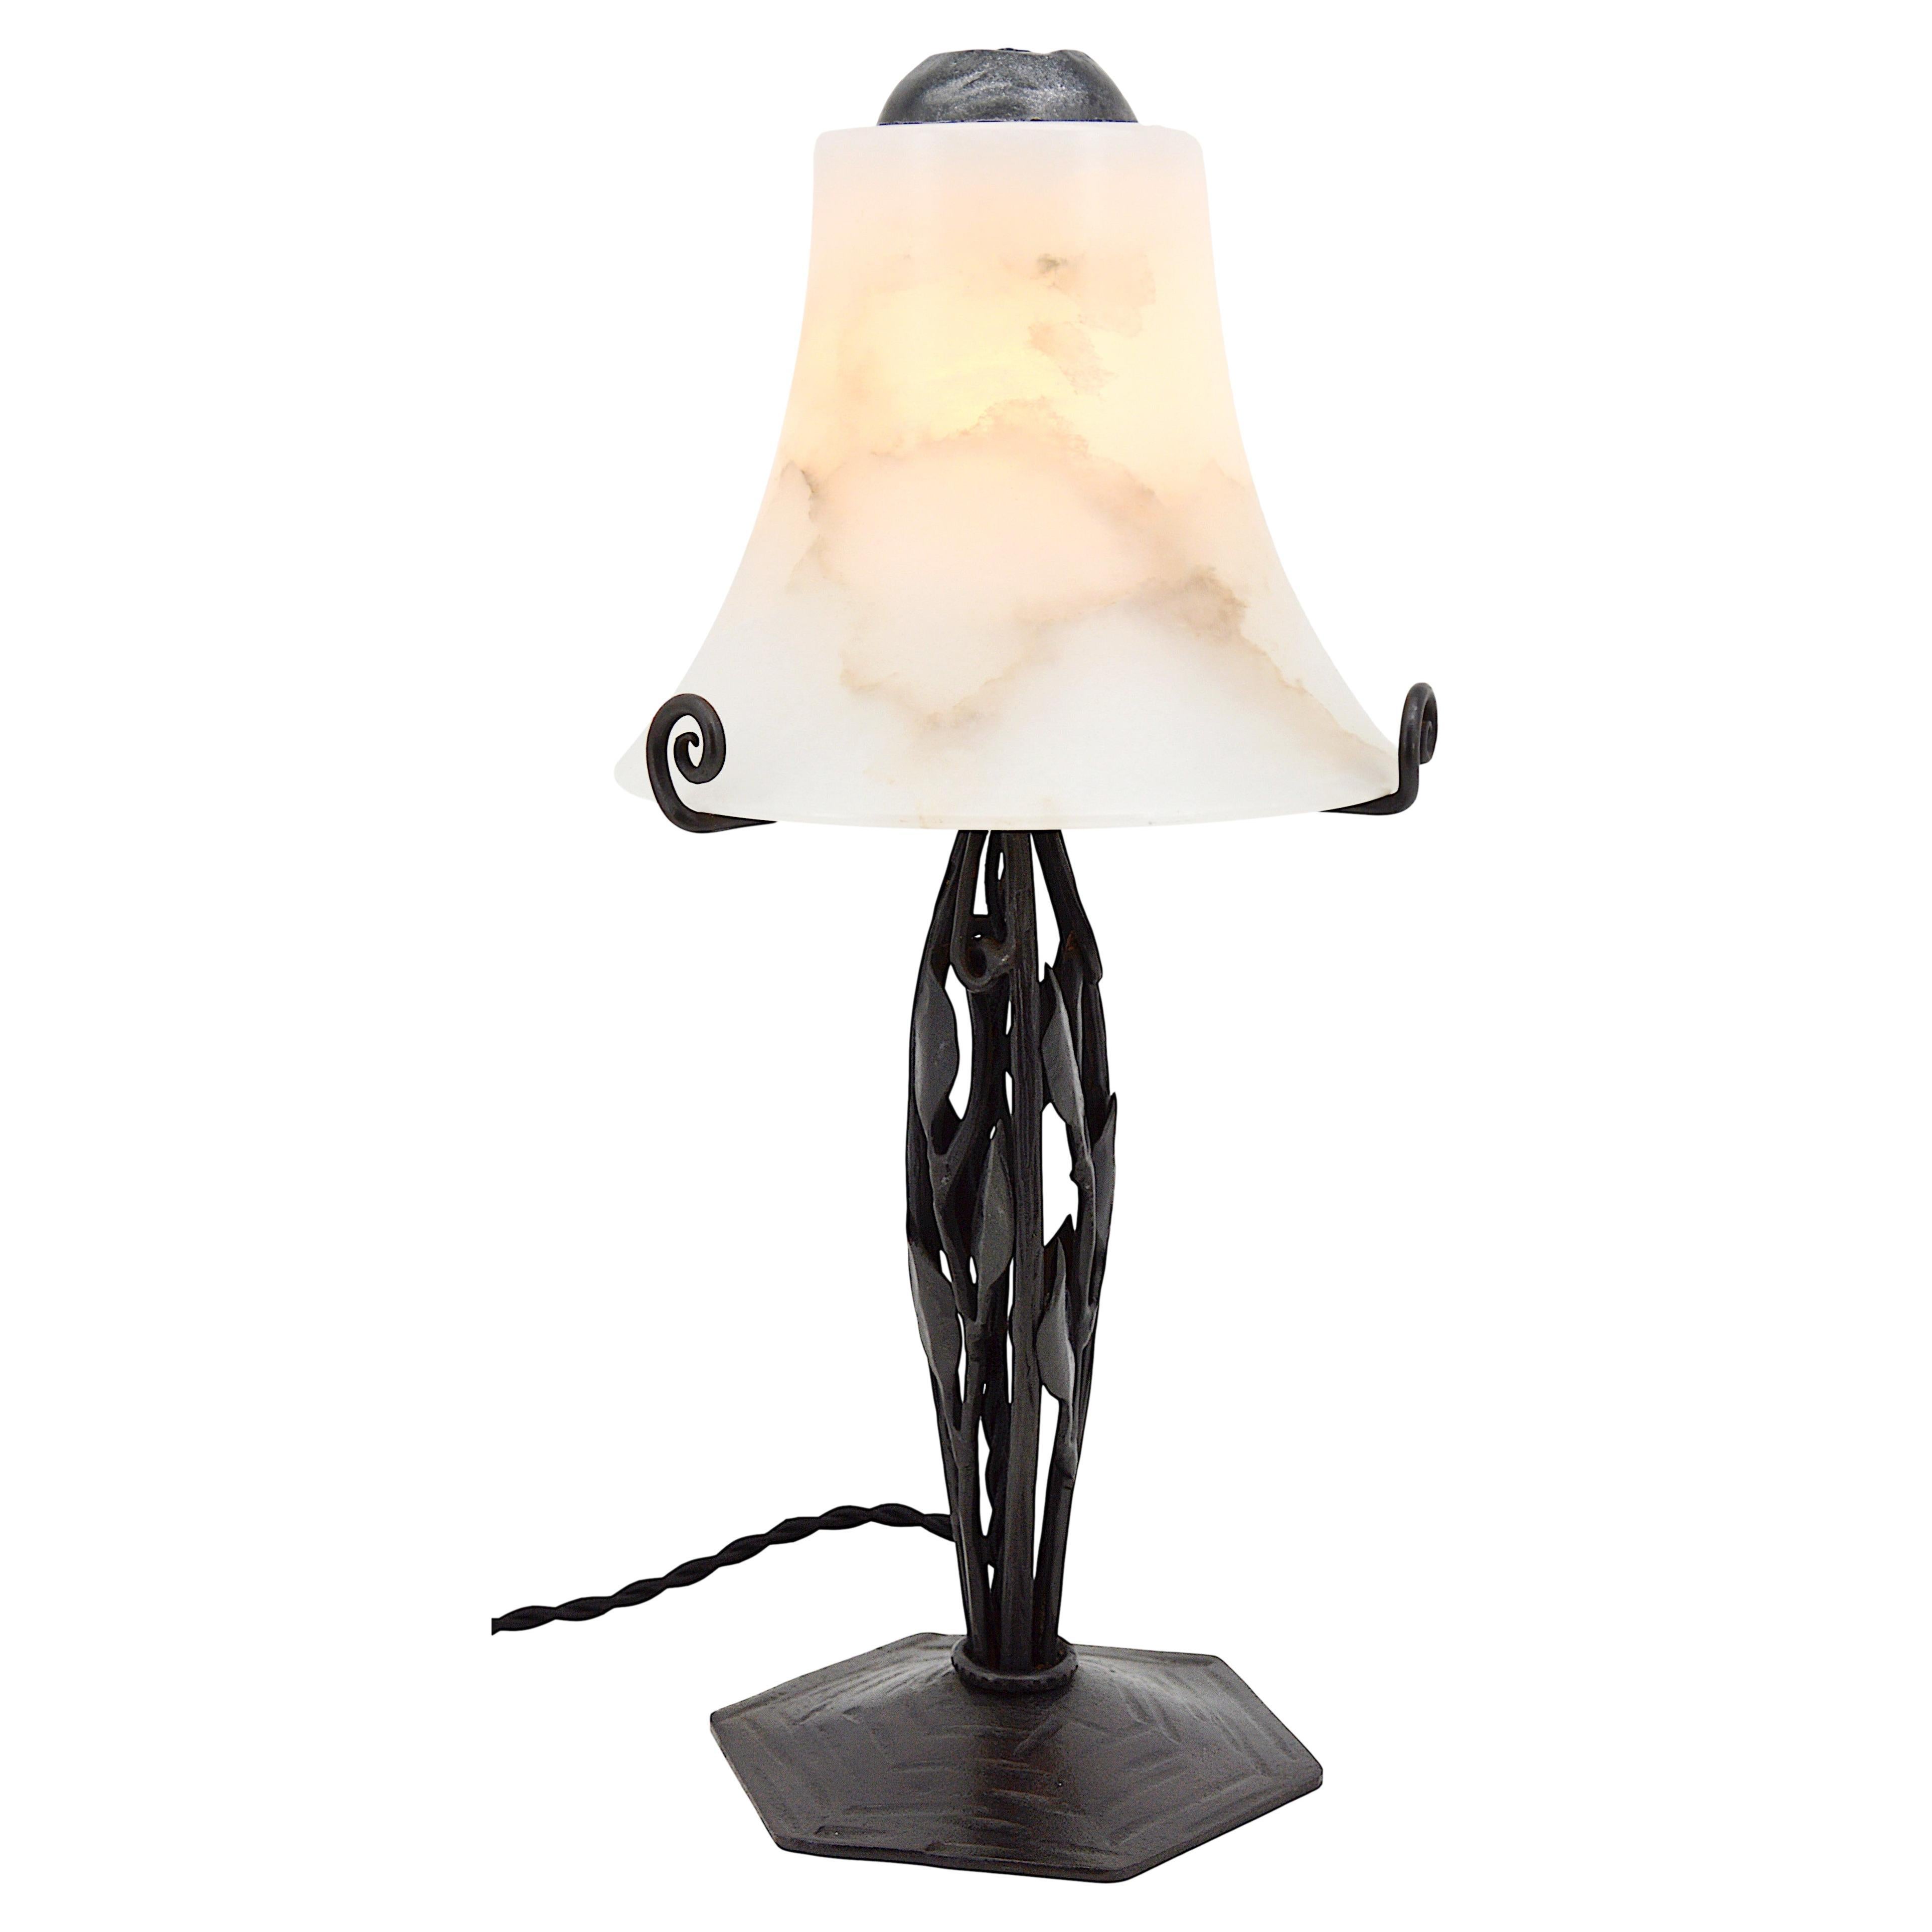 French Art Deco Alabaster and Wrought-Iron Table Lamp, 1925 For Sale